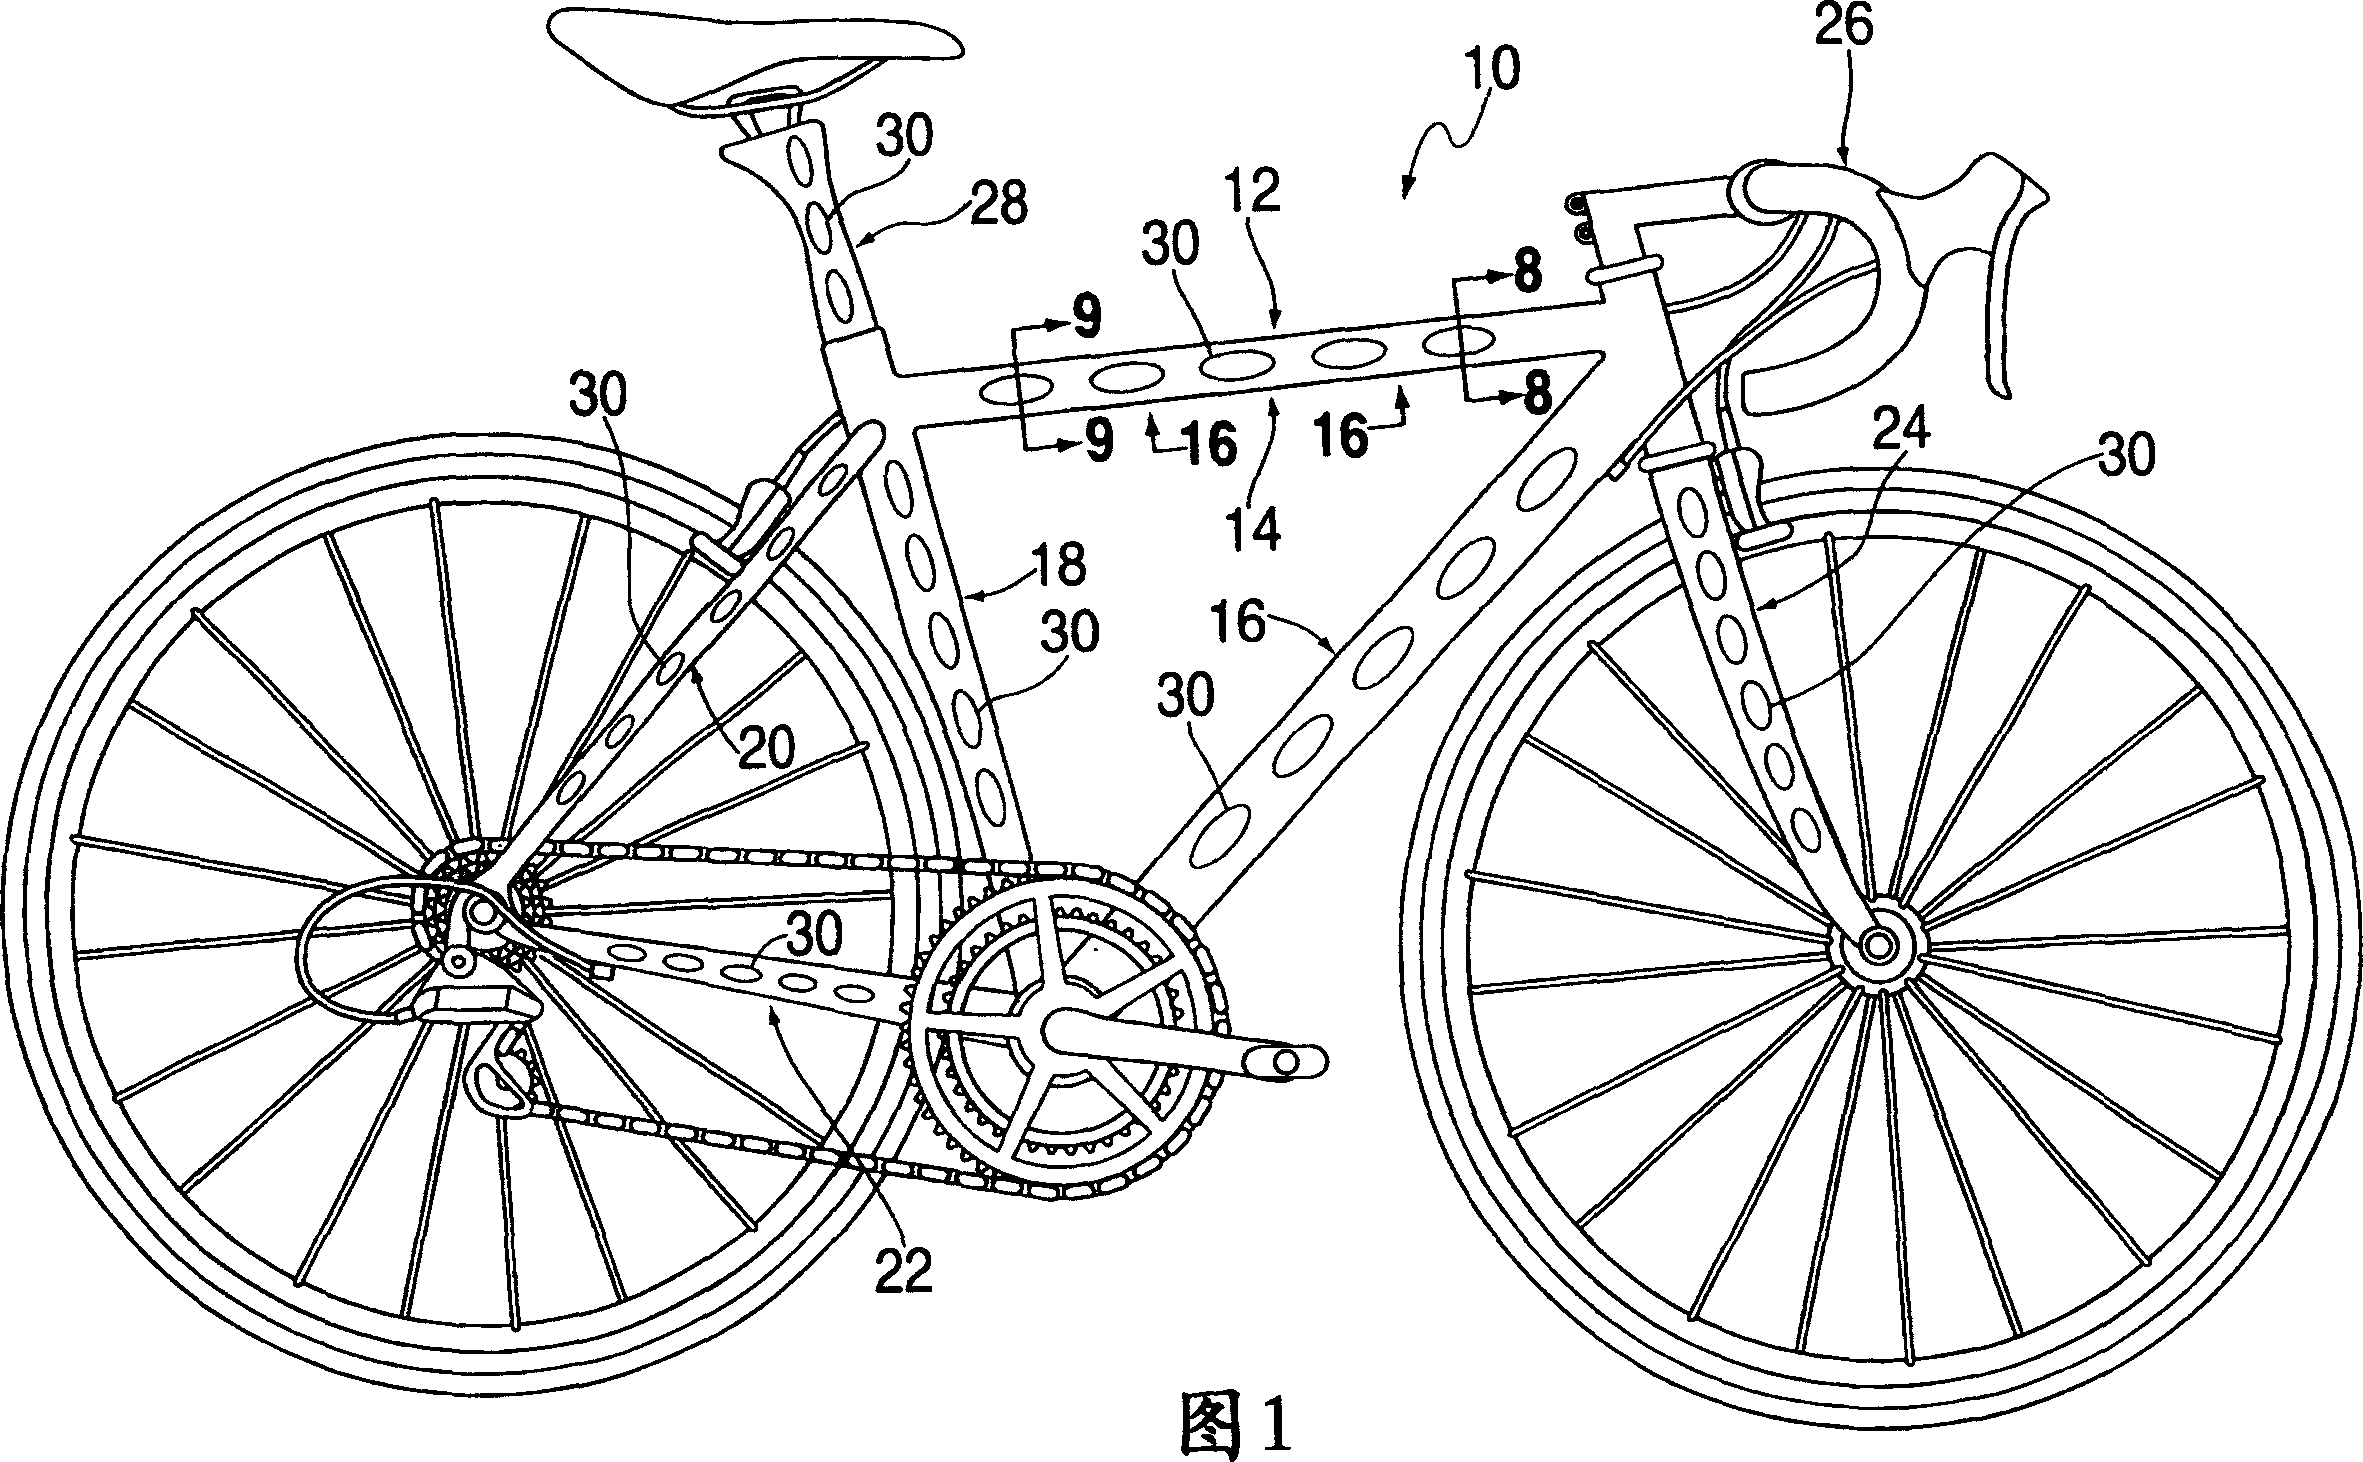 Bicycle having multiple tube frame structure.